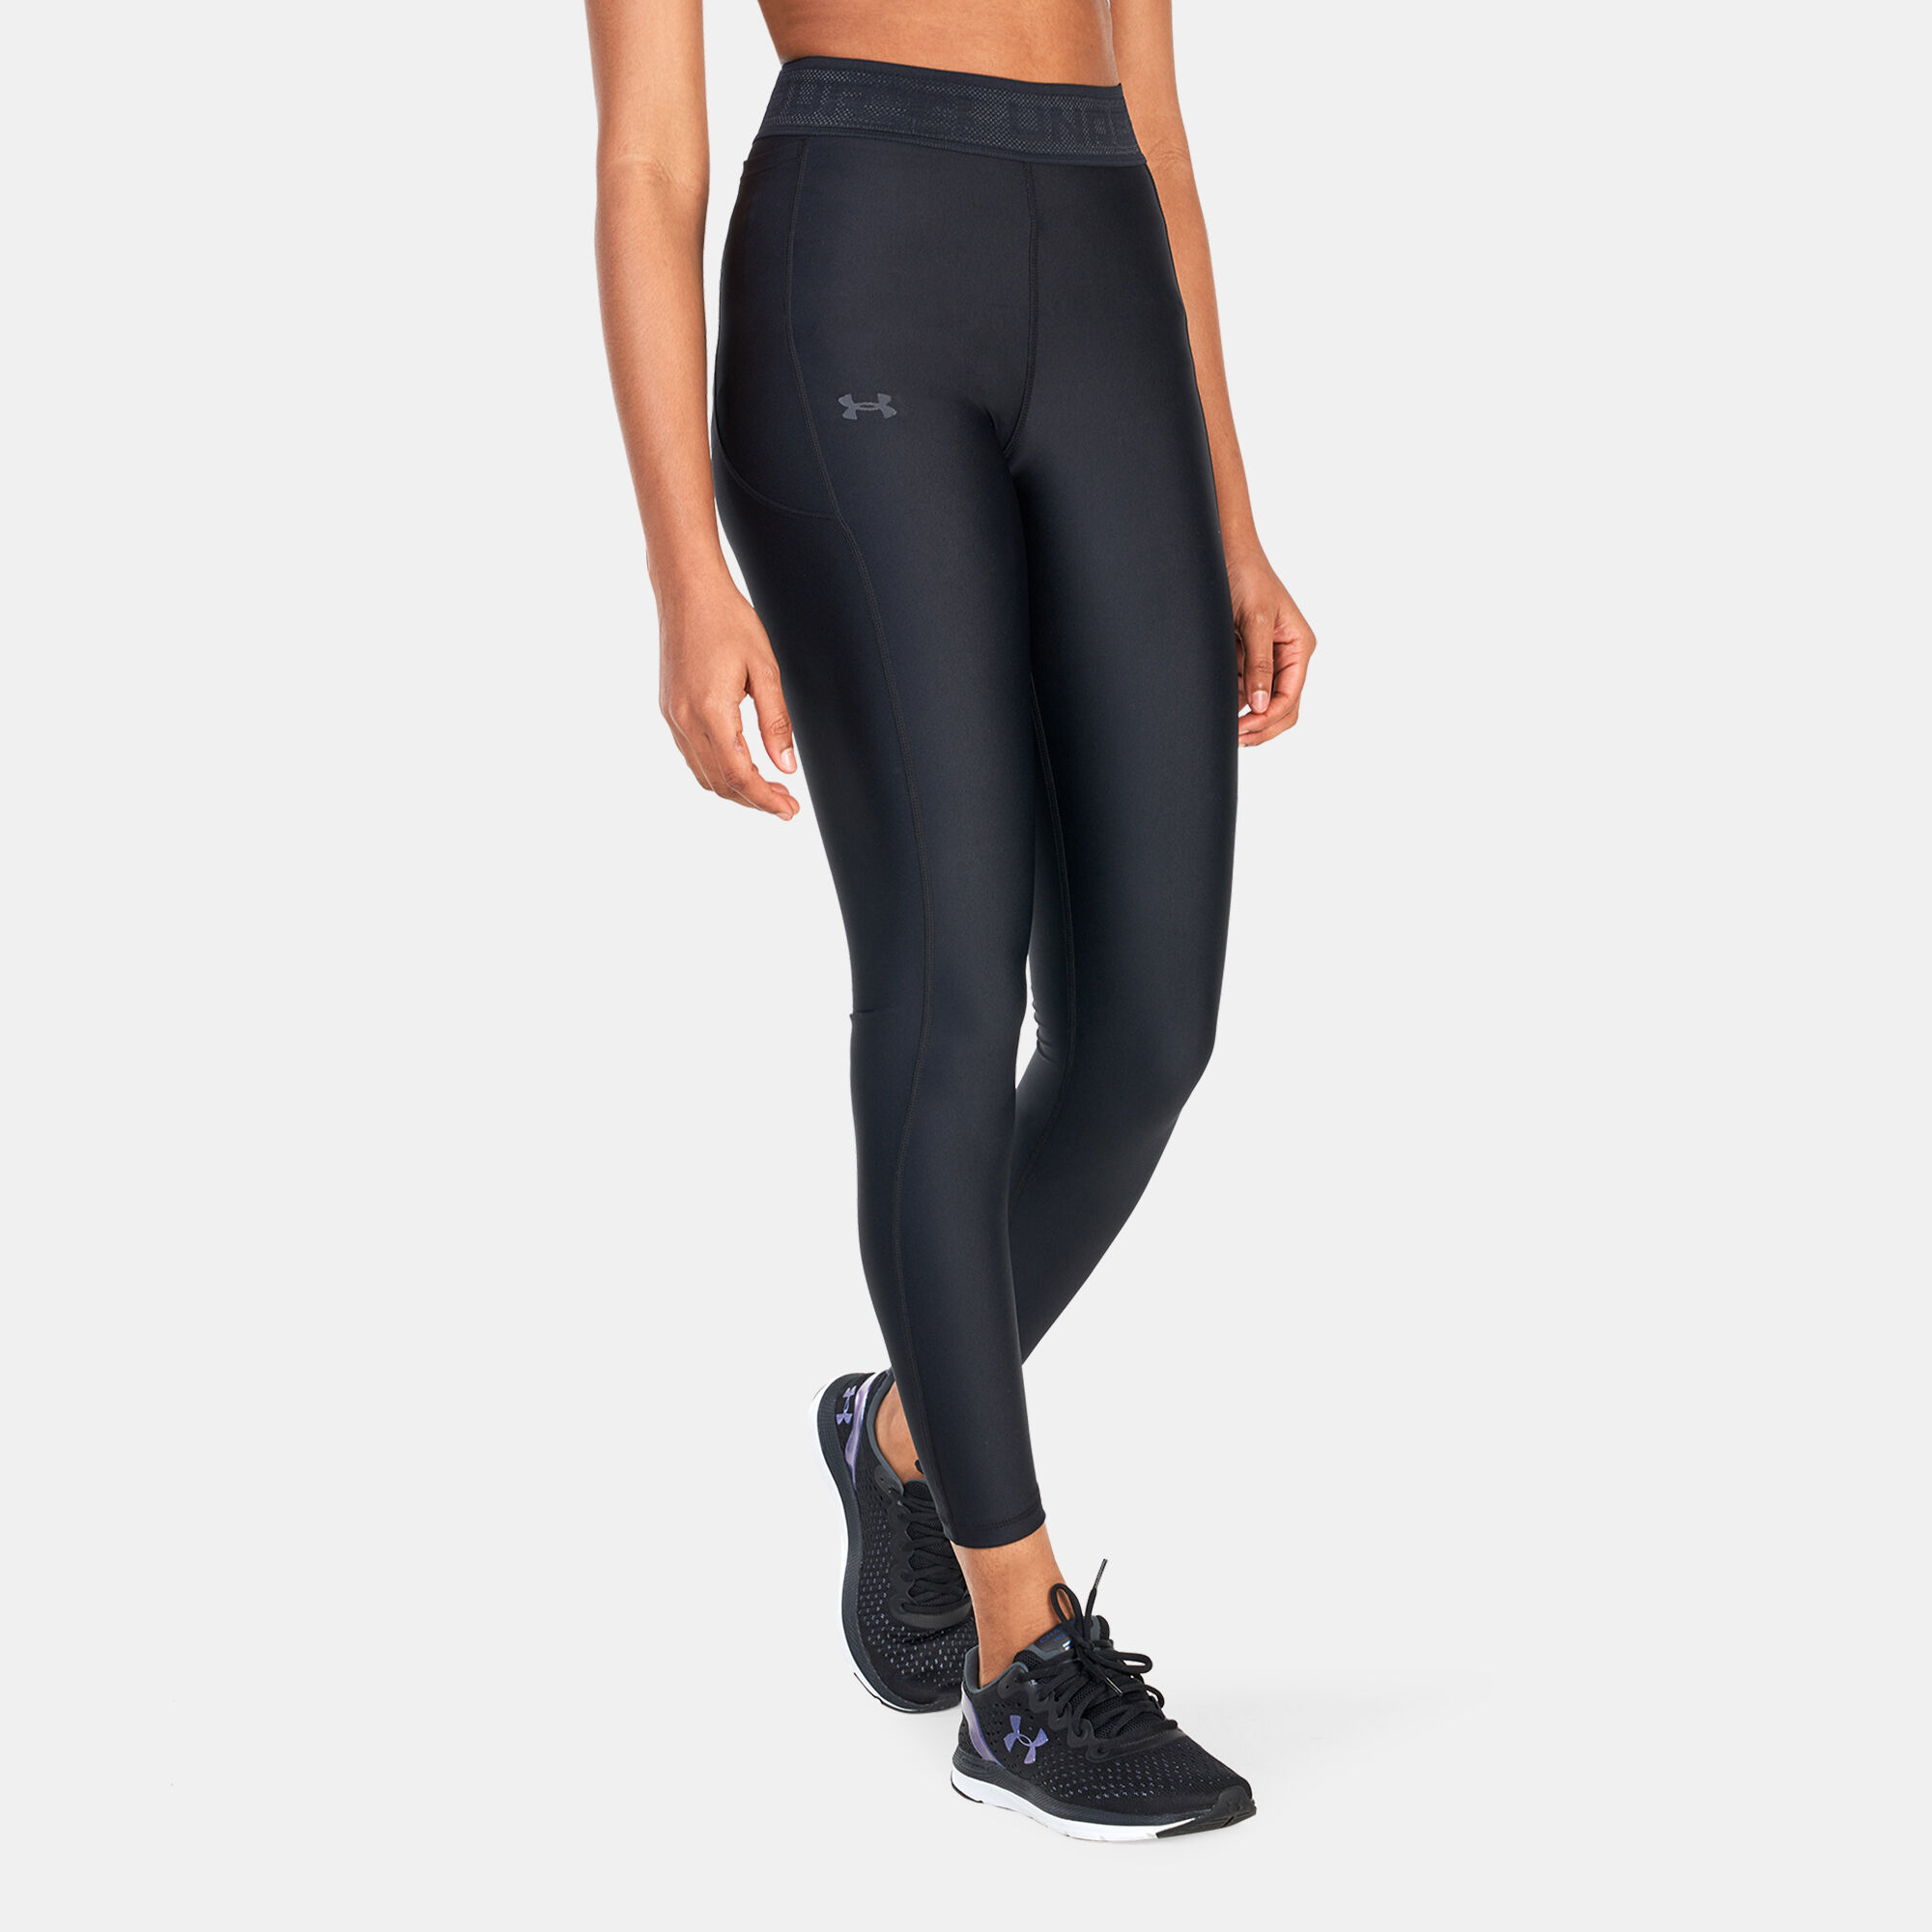 Leggings Brand In India | International Society of Precision Agriculture